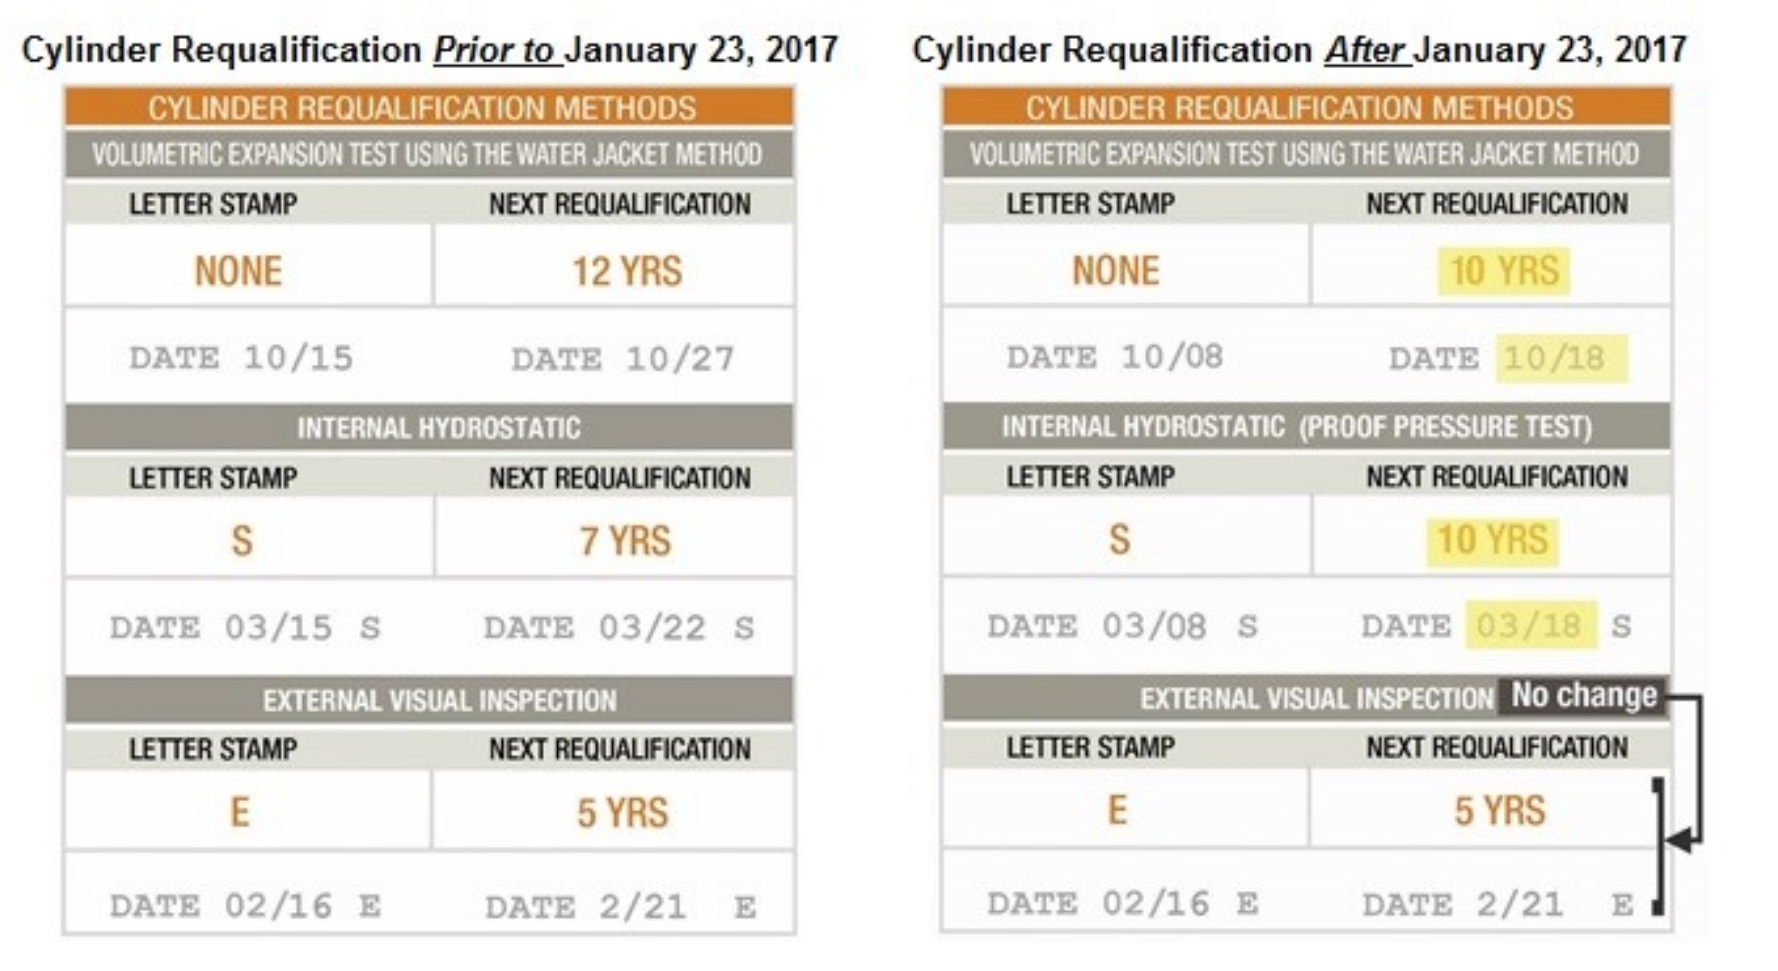 Cylinder Requalification Graphic 2017